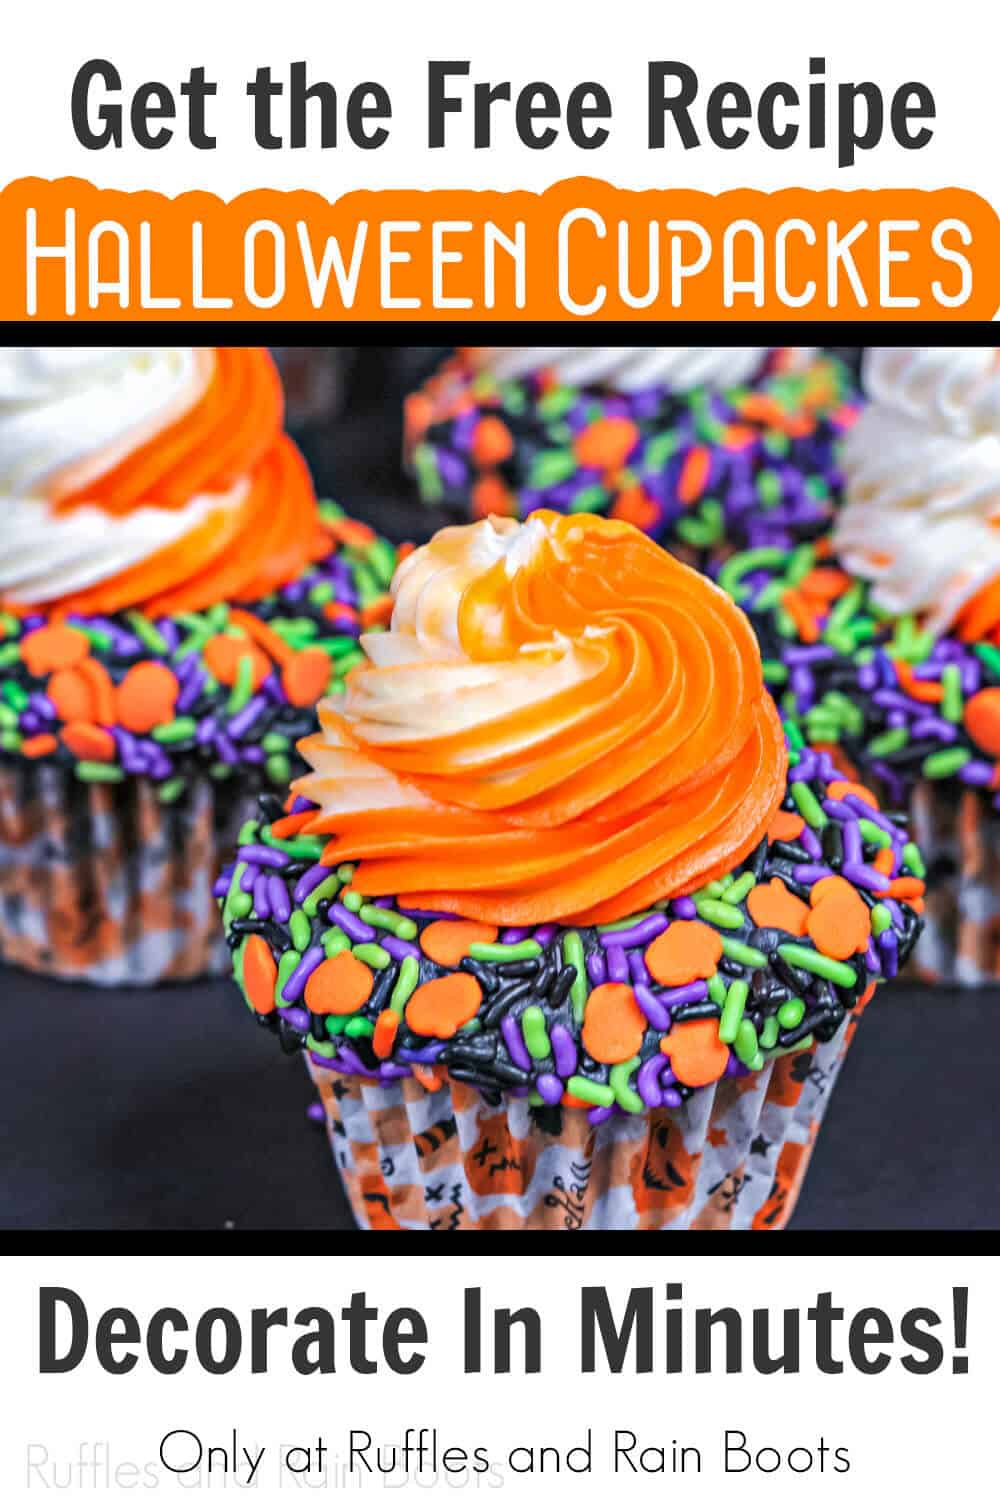 Vertical image of a Halloween cupcake decorating idea with orange and white frosting, a bed of sprinkles, and Jack O Lantern cupcake wrappers on black background.